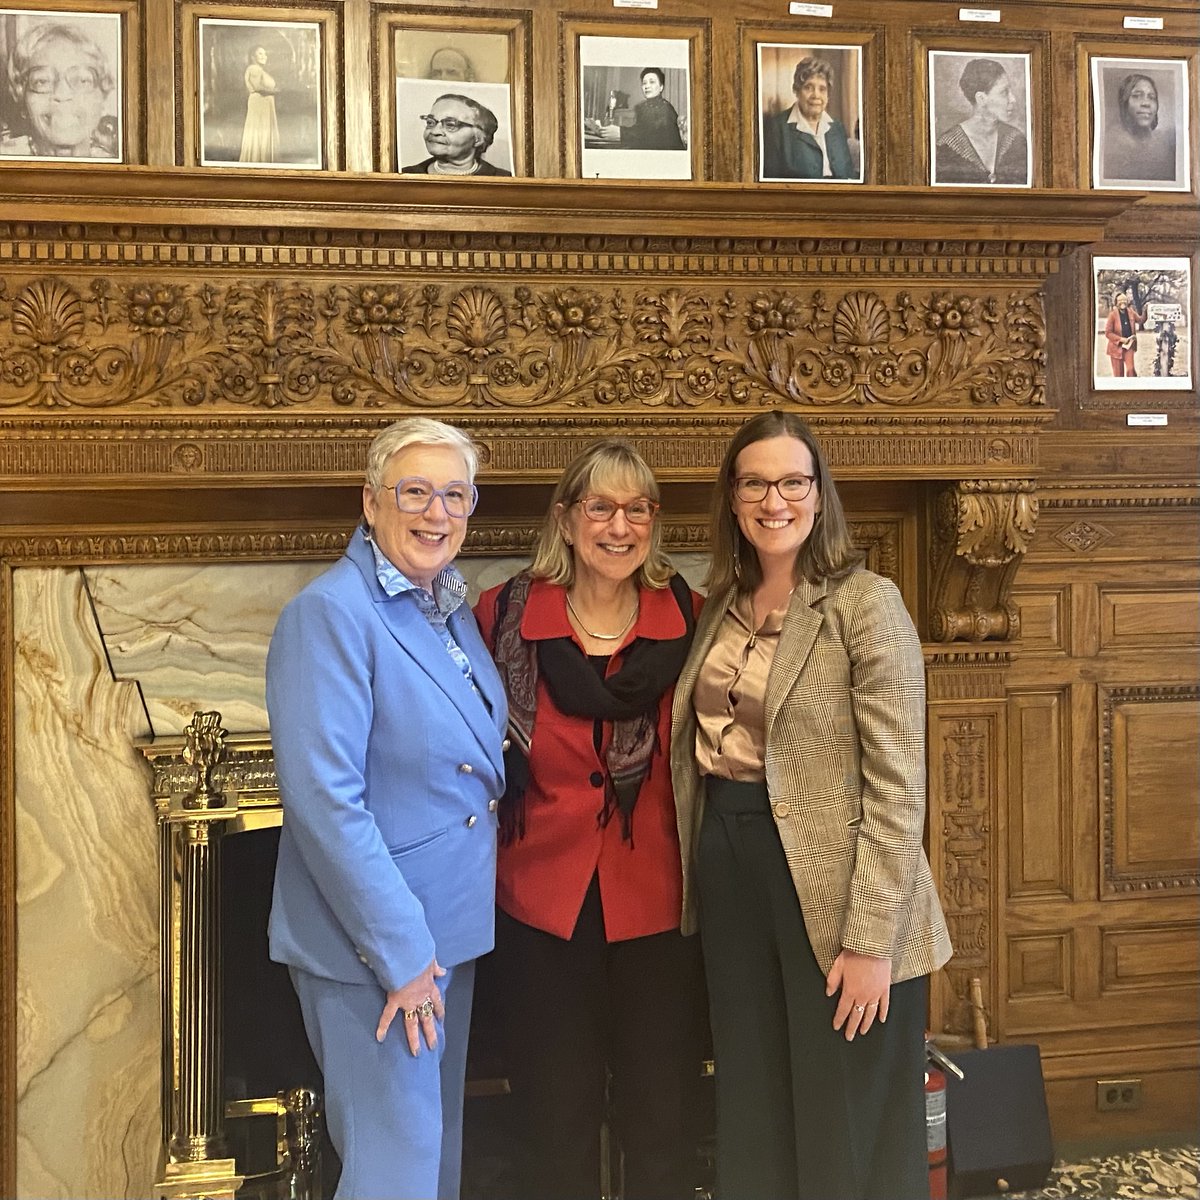 Thank you Sen. Spilka for hosting @KarinaGould & @BernJordanCG for a wonderful conversation on the importance of early learning & child care. Increasing women’s workforce participation drives strong economic growth in our communities, which enhances North American competitiveness